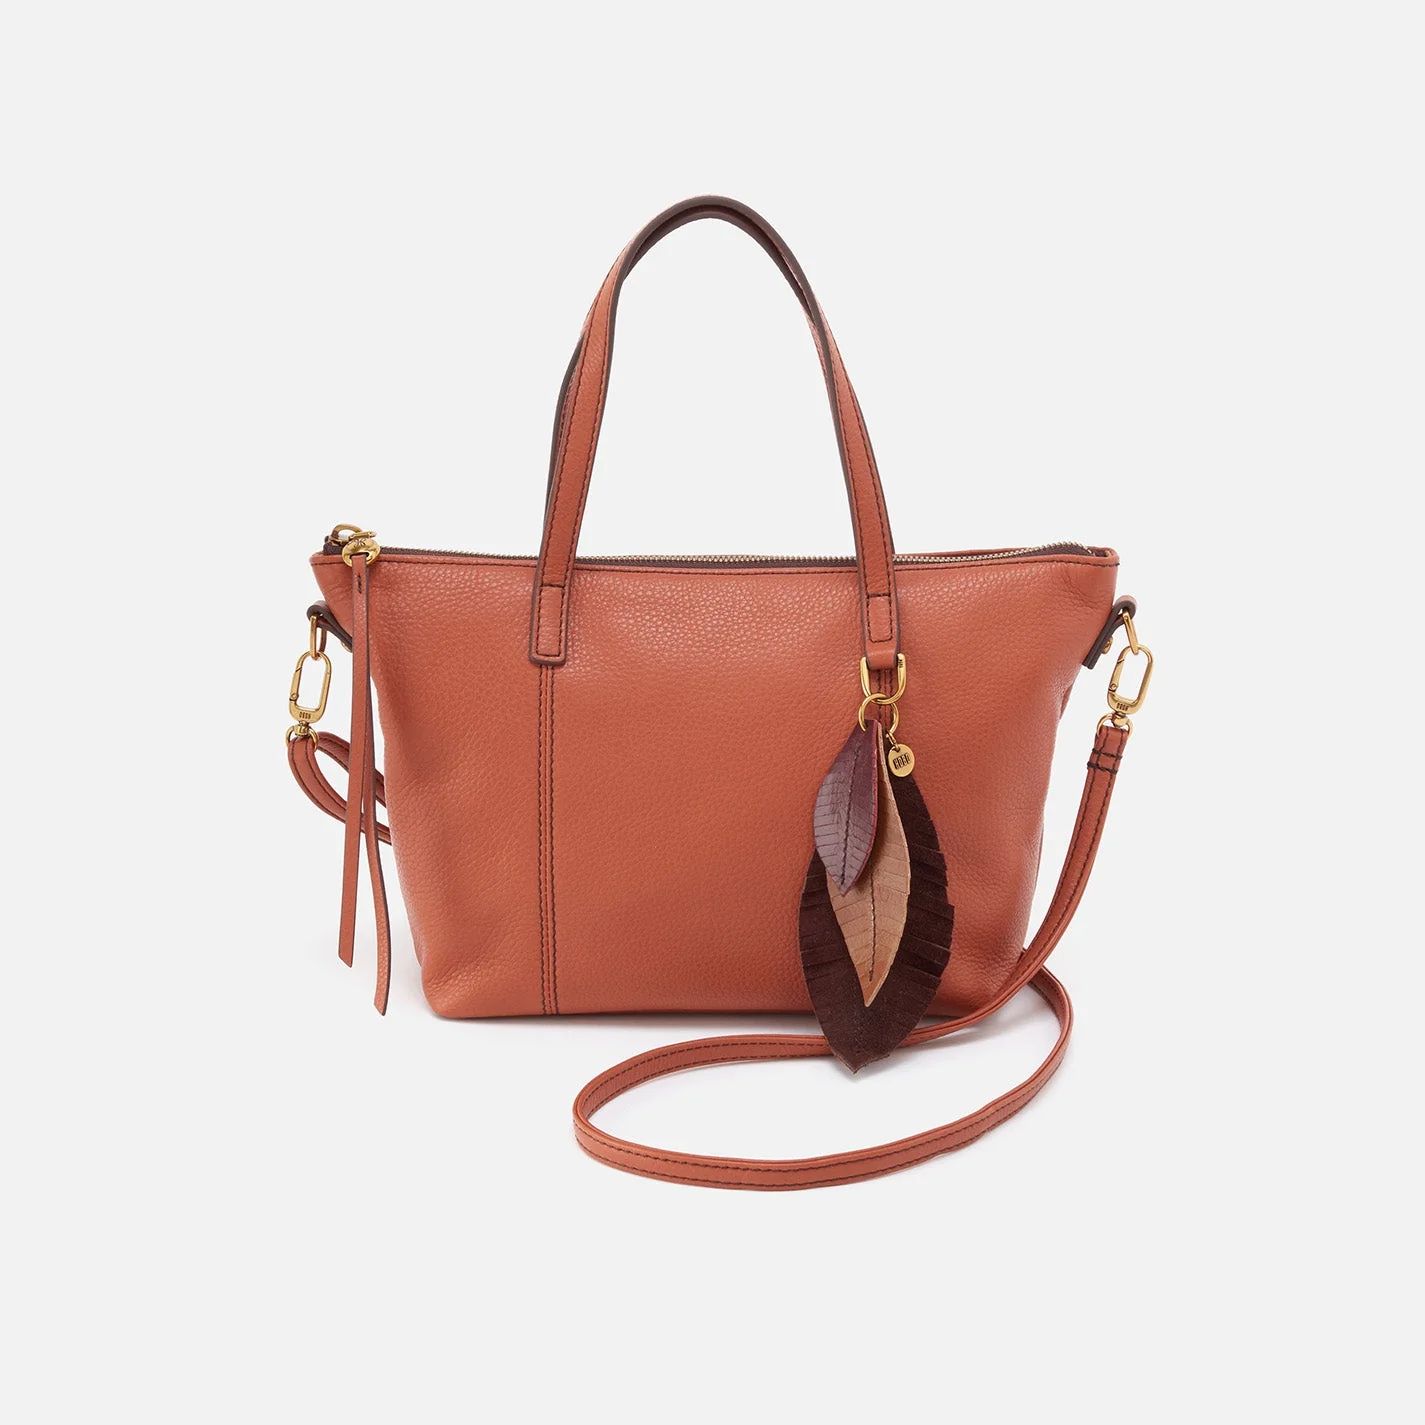 Kingston Mini Tote in Pebbled Leather - Apricot | HOBO Bags